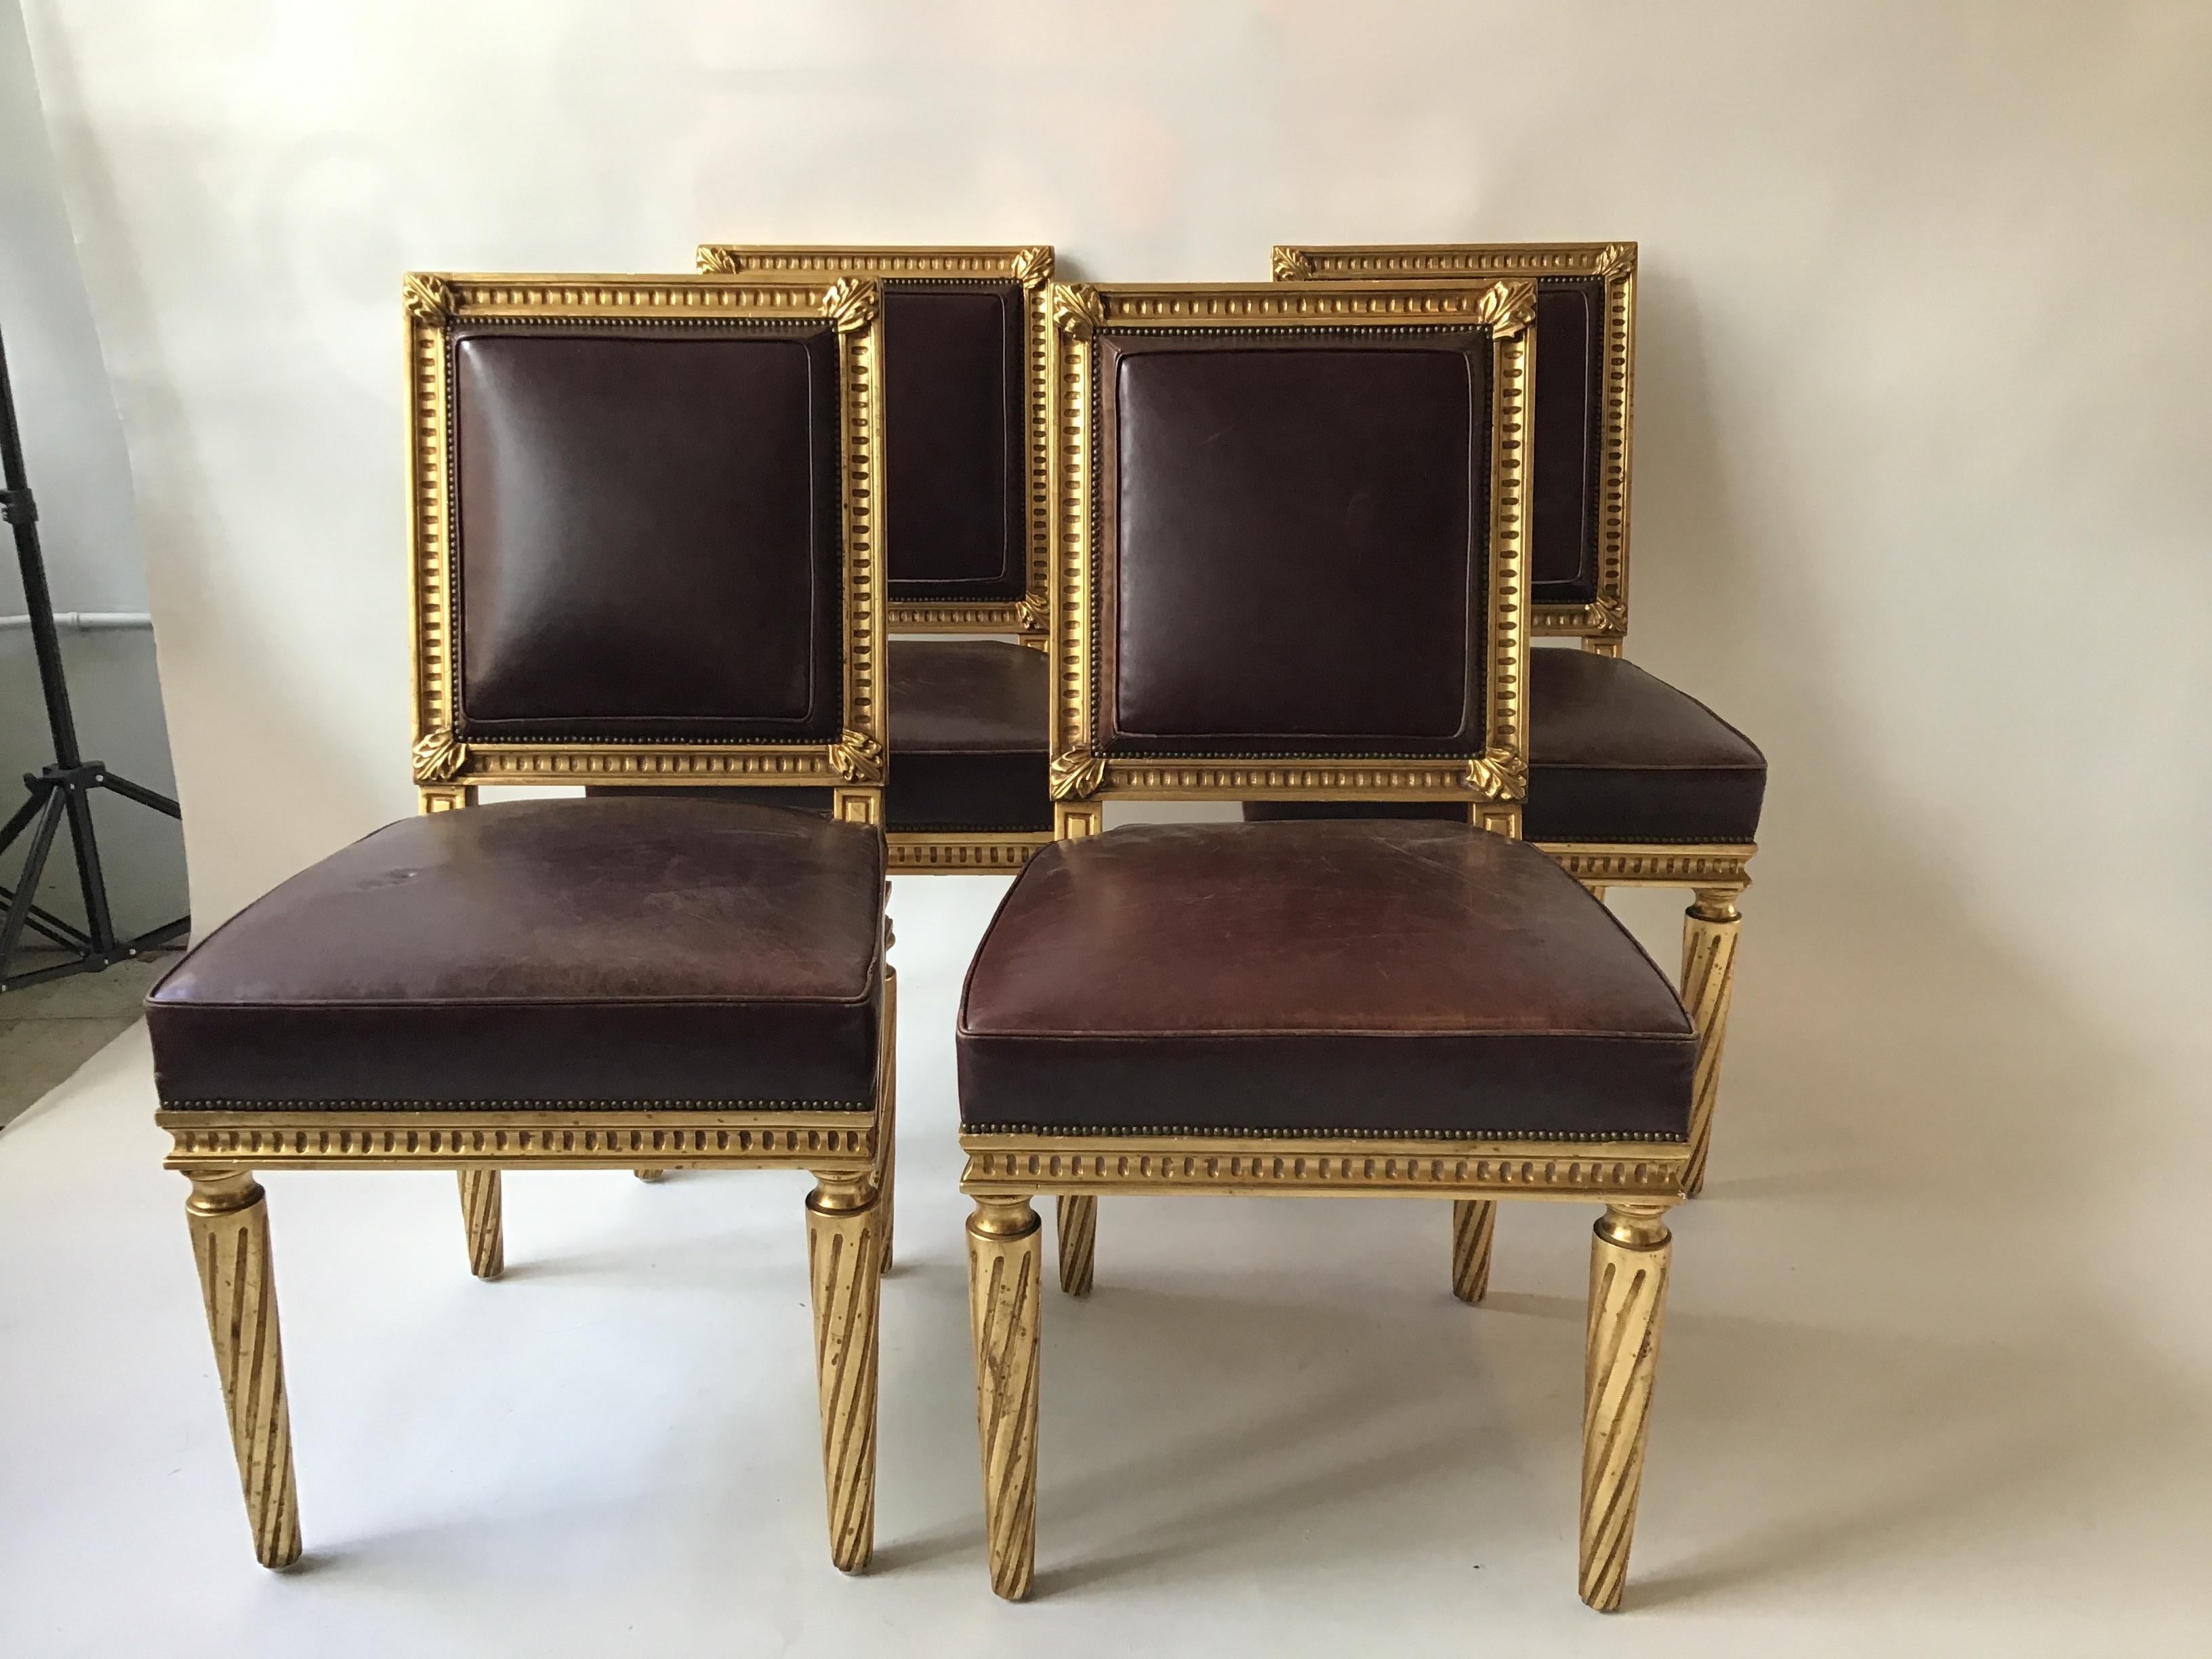 4 French style Louis XVI giltwood and squared leather dining chairs. Nice quality. From an East Hampton, NY estate.